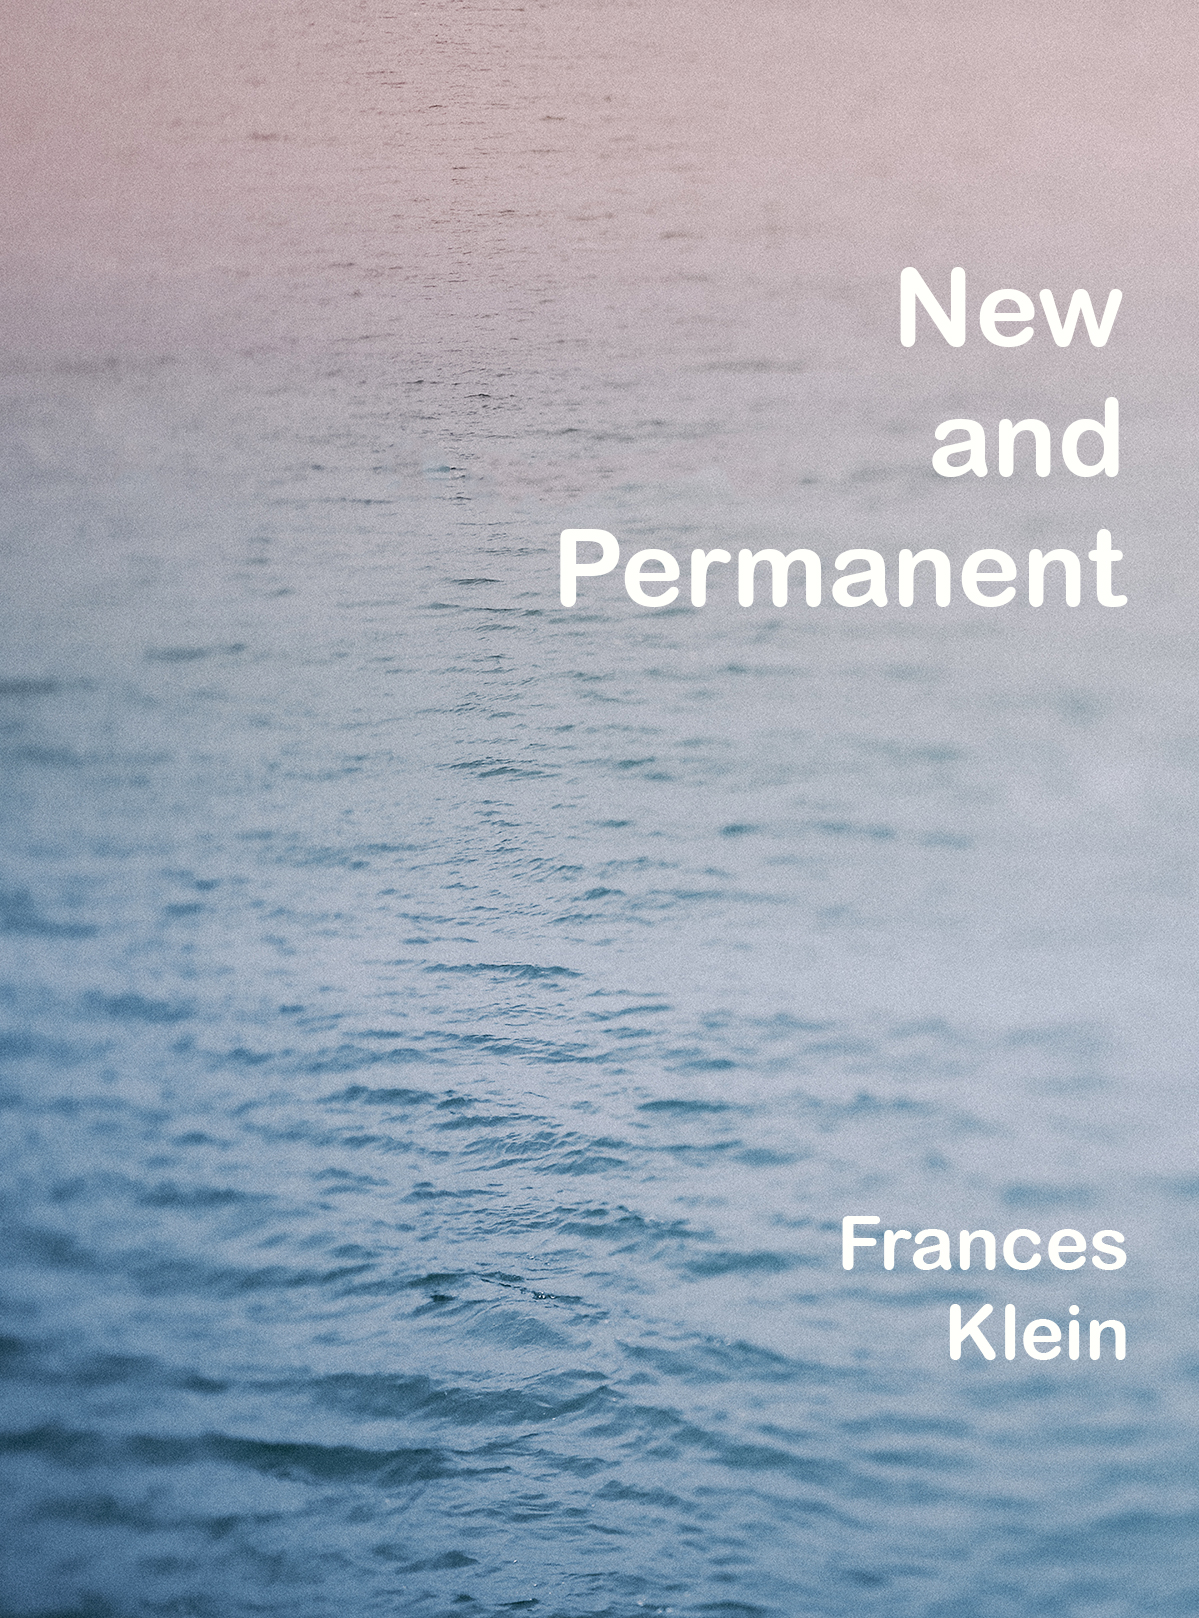 Cover for New and Permanent by Frances Klein. Ocean water at sunset with hazy edges. The title and author name are right-aligned in white font